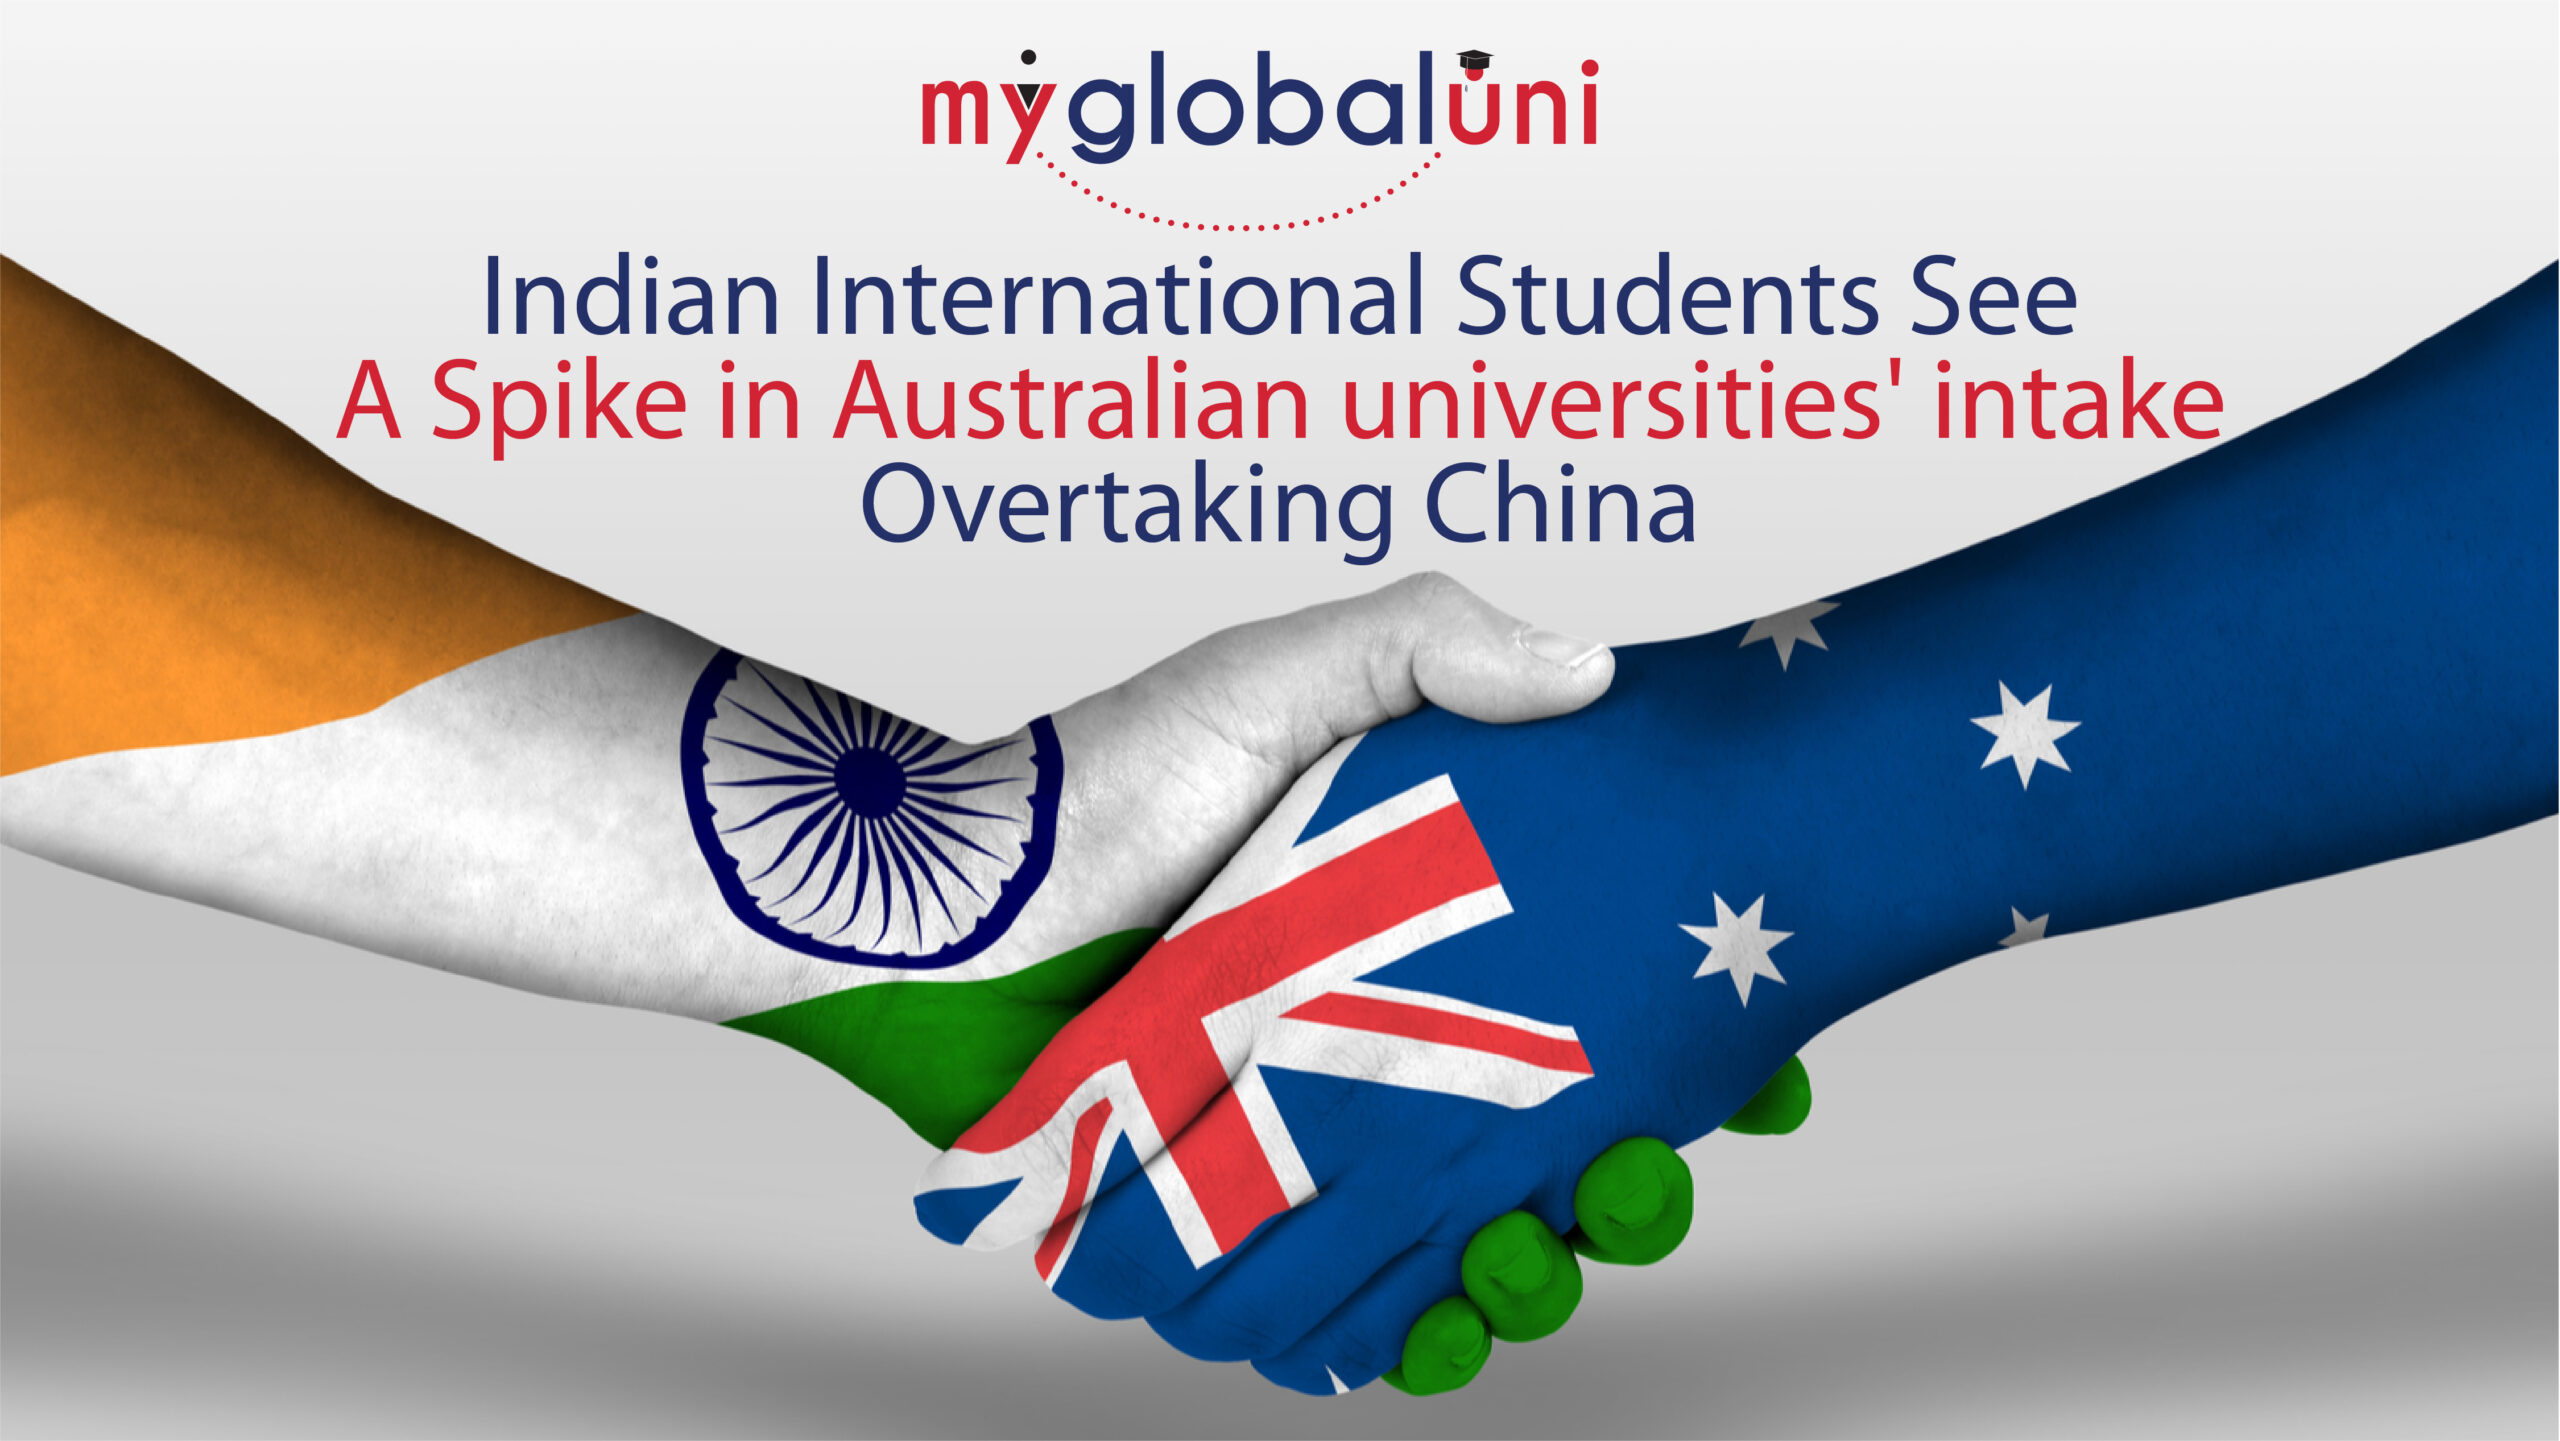 Indian international students see a spike in Australian universities’ intake overtaking China due to deteriorating relations between the two nations